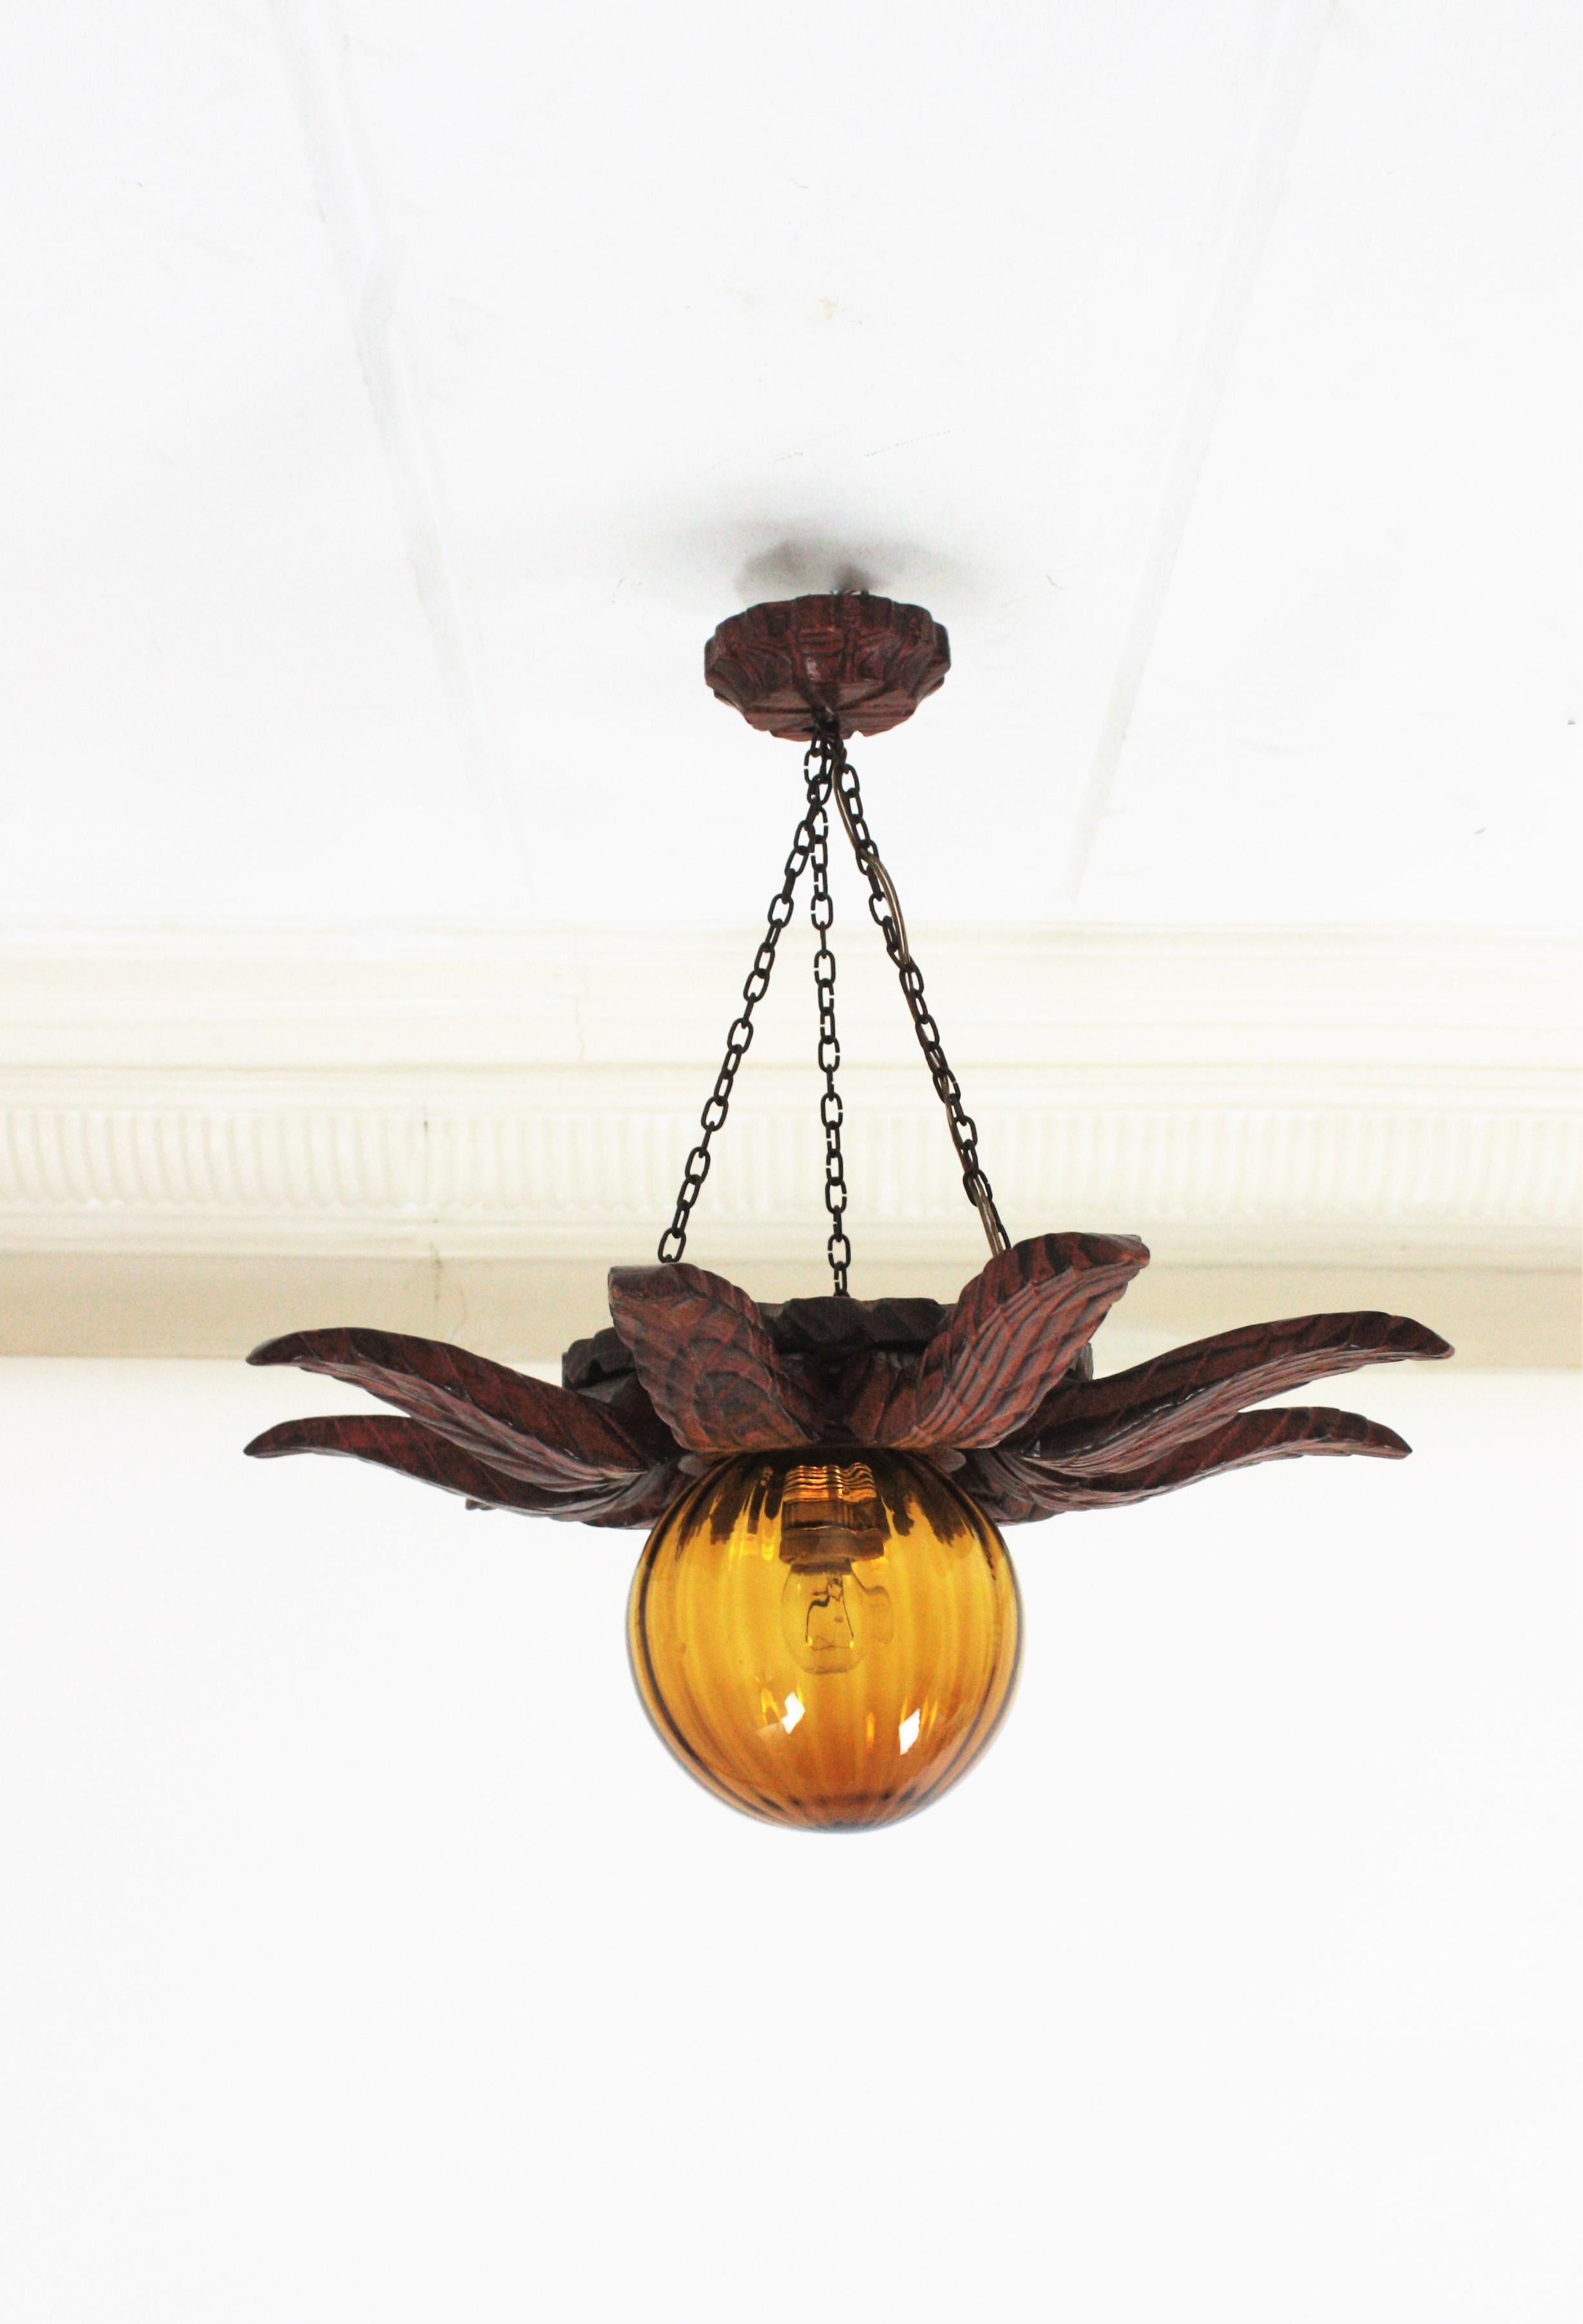 Spanish Colonial Sunburst Light Fixture in Carved Wood with Amber Glass Globe For Sale 2